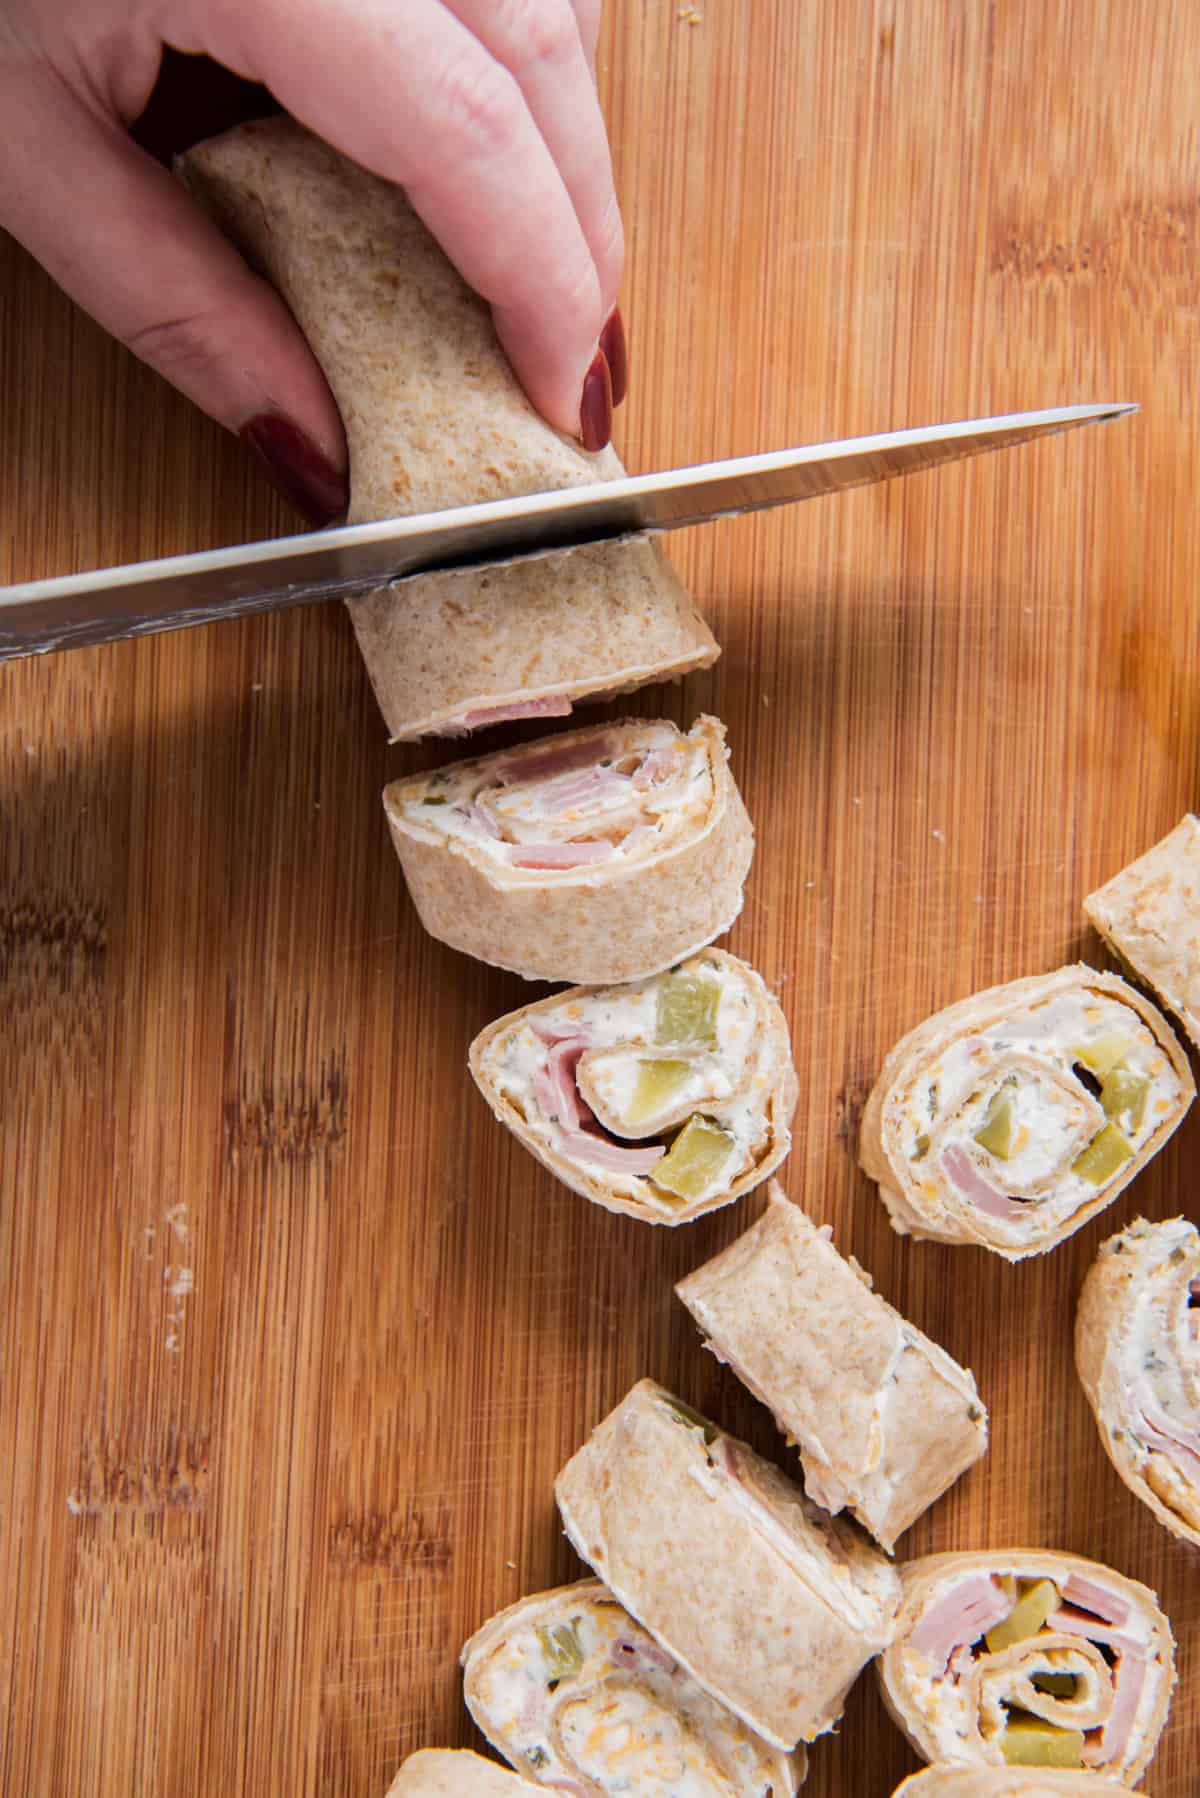 A knife slicing the rolled tortilla into mini pinwheels.